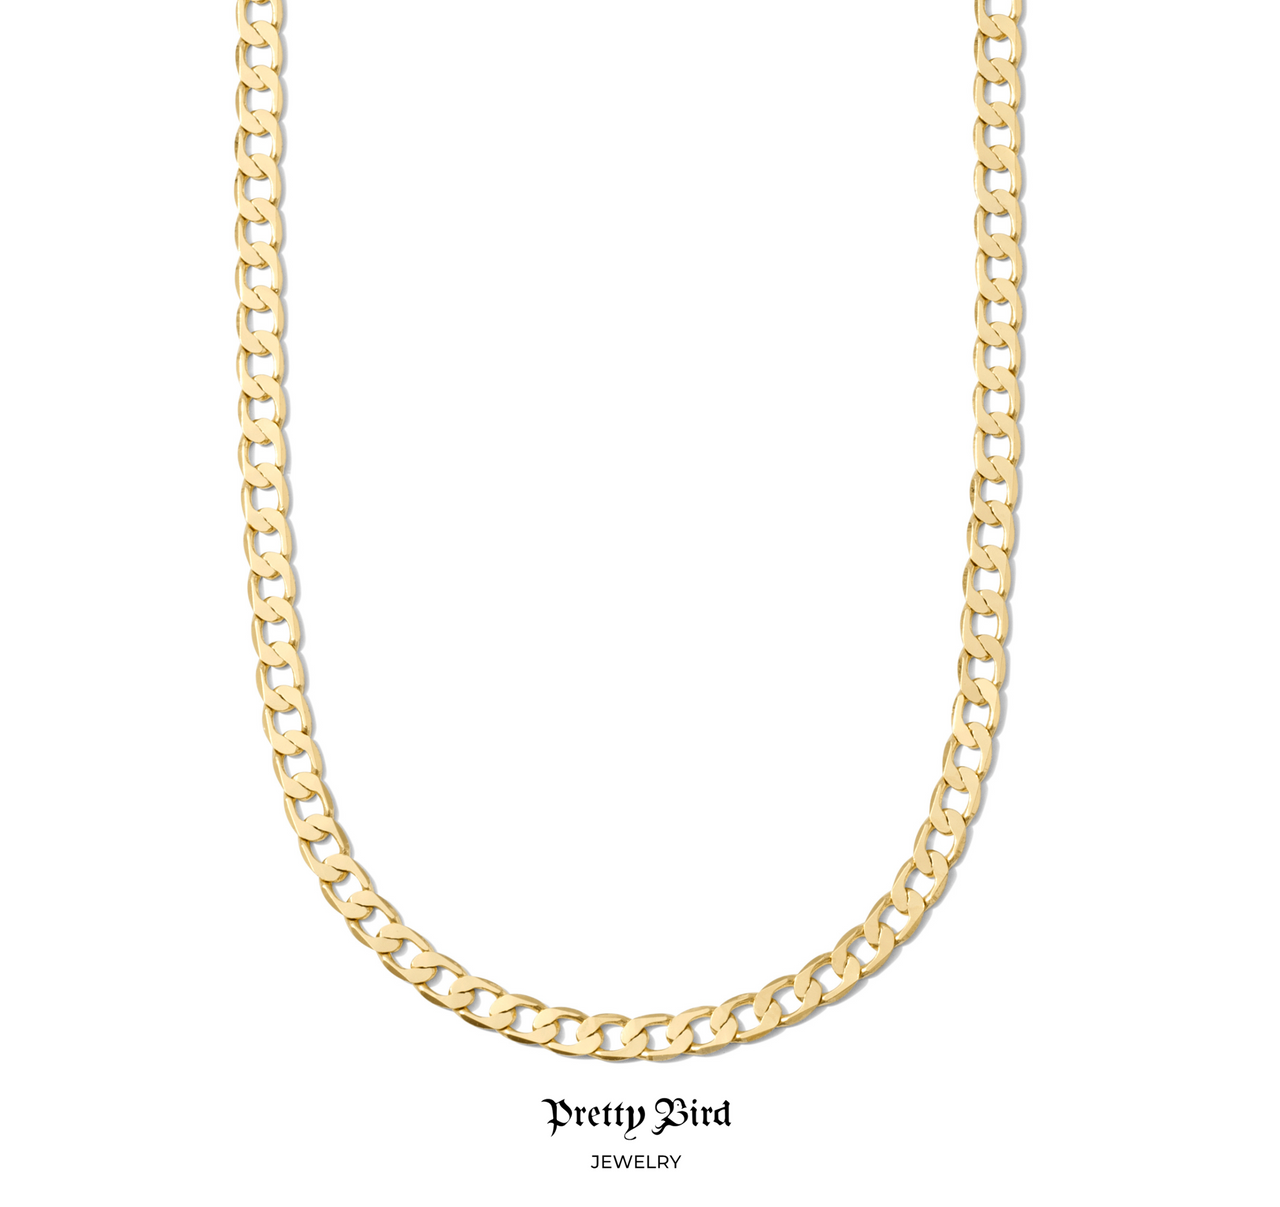 The Curb Chain Necklace